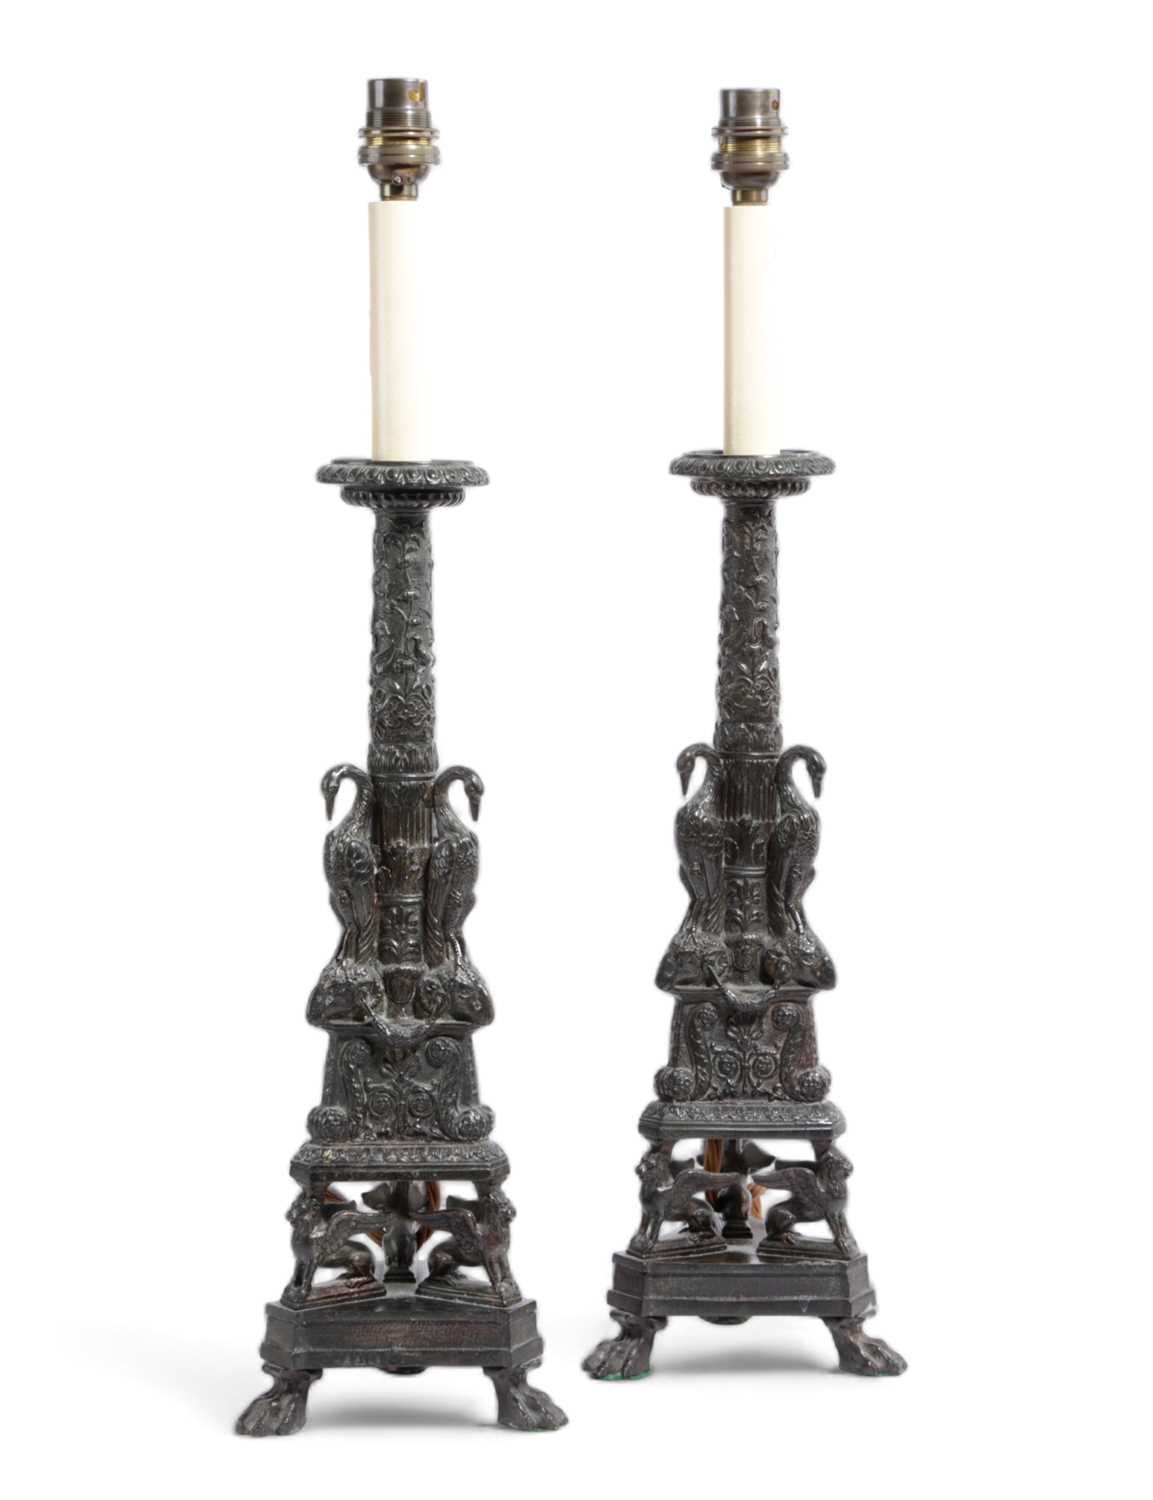 A PAIR OF BRONZE HELLENISTIC STYLE CANDLESTICKS AFTER THE MODEL BY GIOVANNI-BATTISTA PIRANESI (